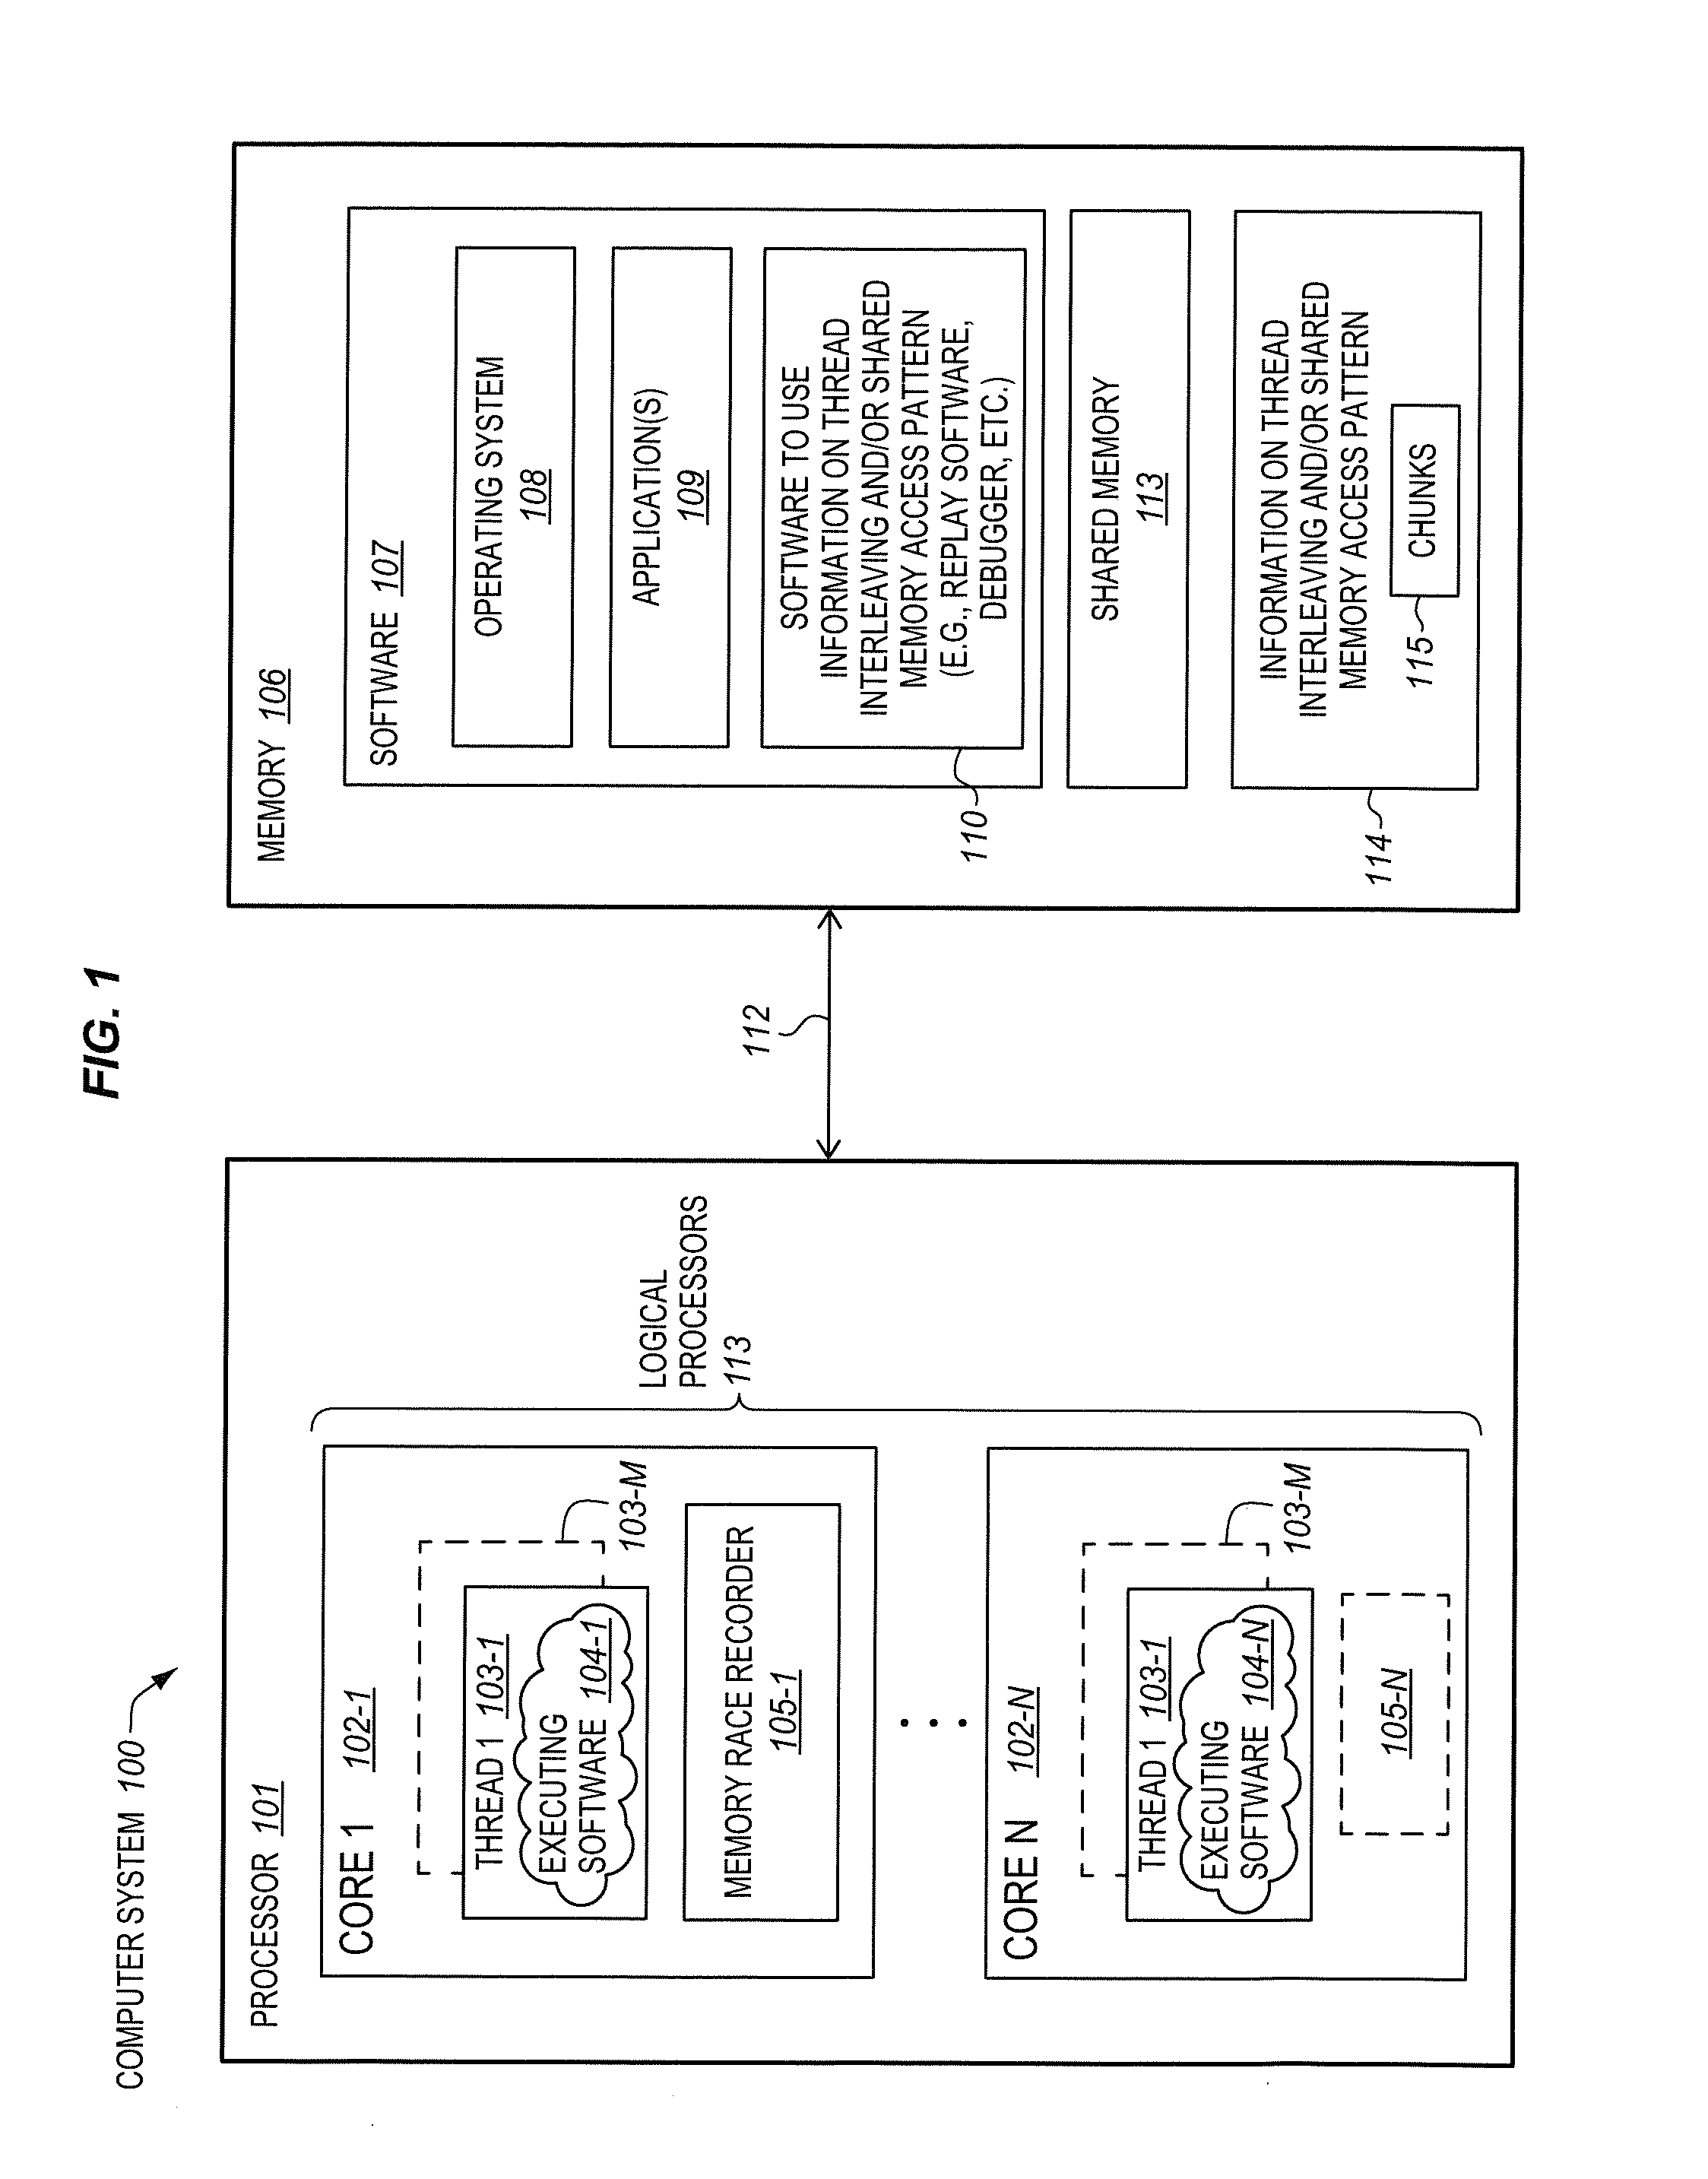 Processor with memory race recorder to record thread interleavings in multi-threaded software